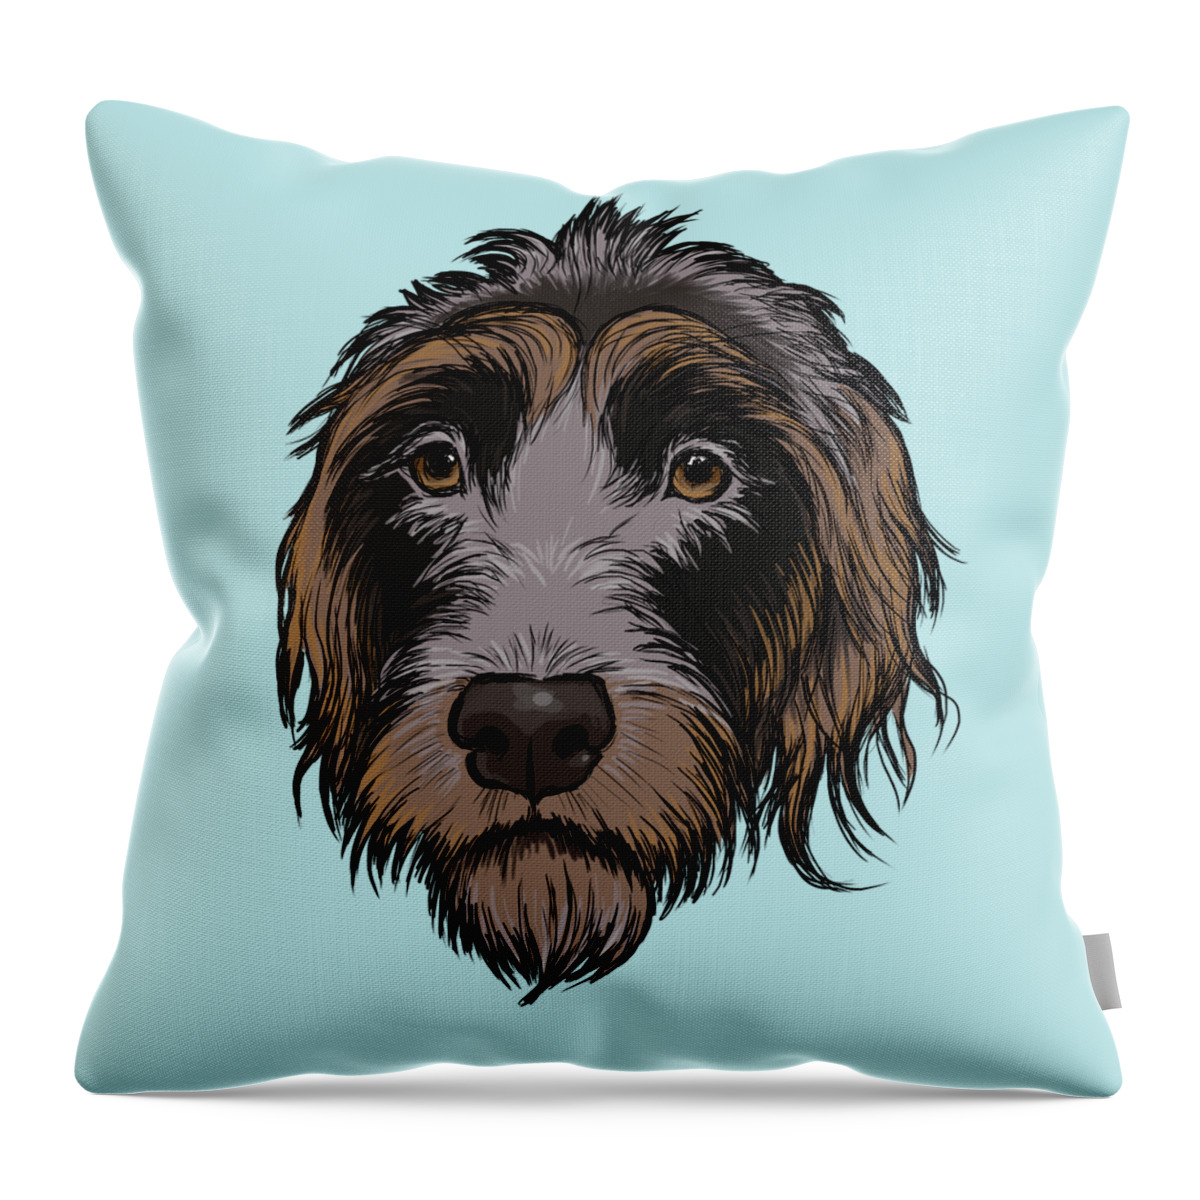 Bohemian Wirehaired Pointer Throw Pillow featuring the digital art Cesky Fousek by Jindra Noewi